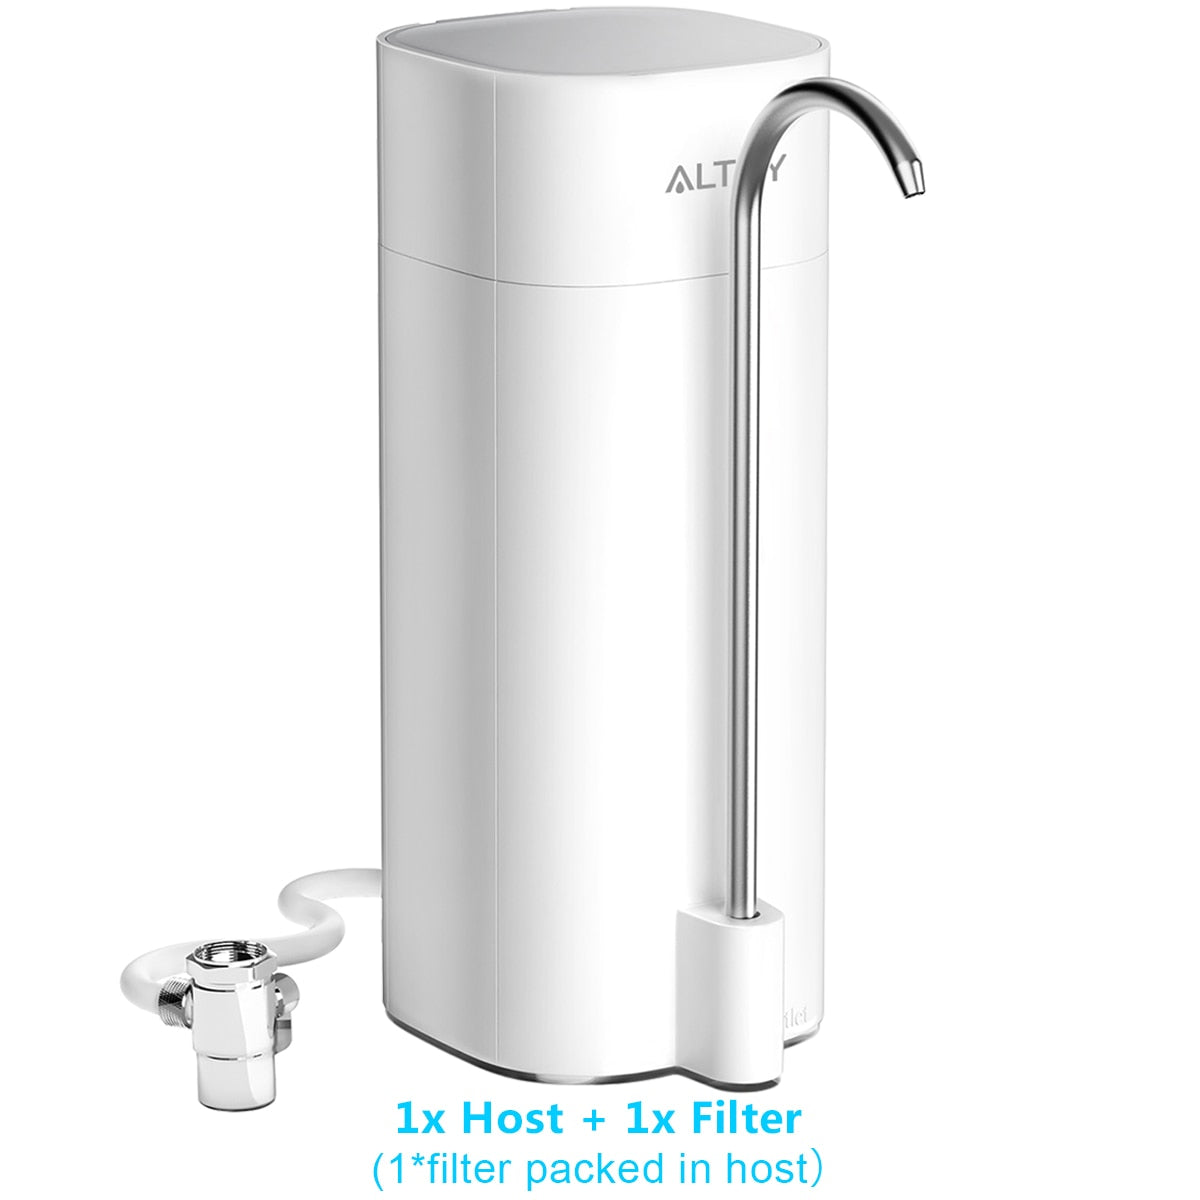 ALTHY Countertop Faucet Drinking Water Filter Purifier Ultrafiltration System, Reduces 99% bacteria, Chlorine, Heavy Metals.